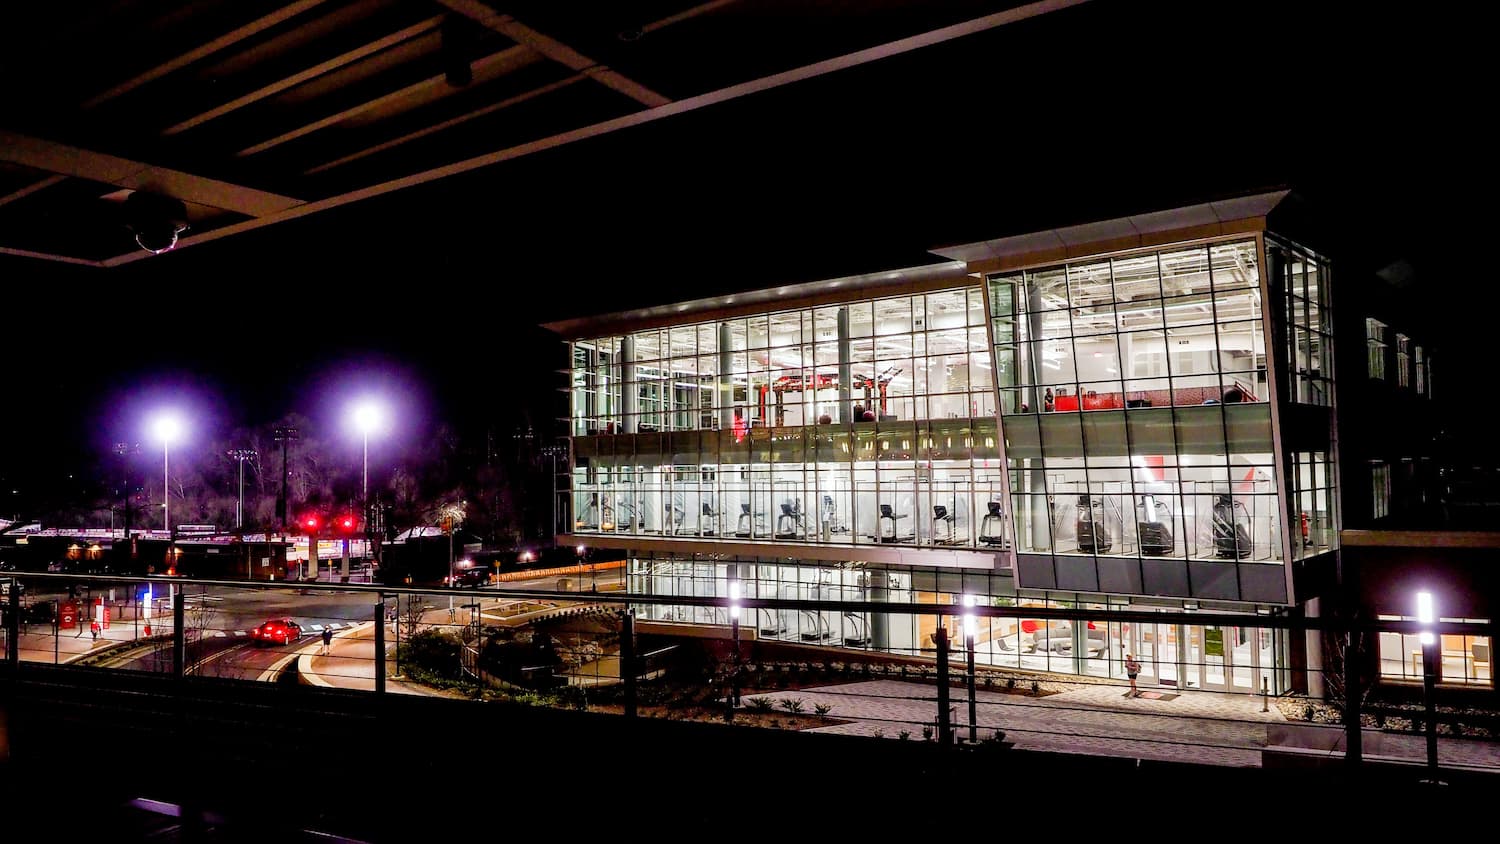 The Wellness and Recreation Center on Cates Avenue is an active campus spot at night.